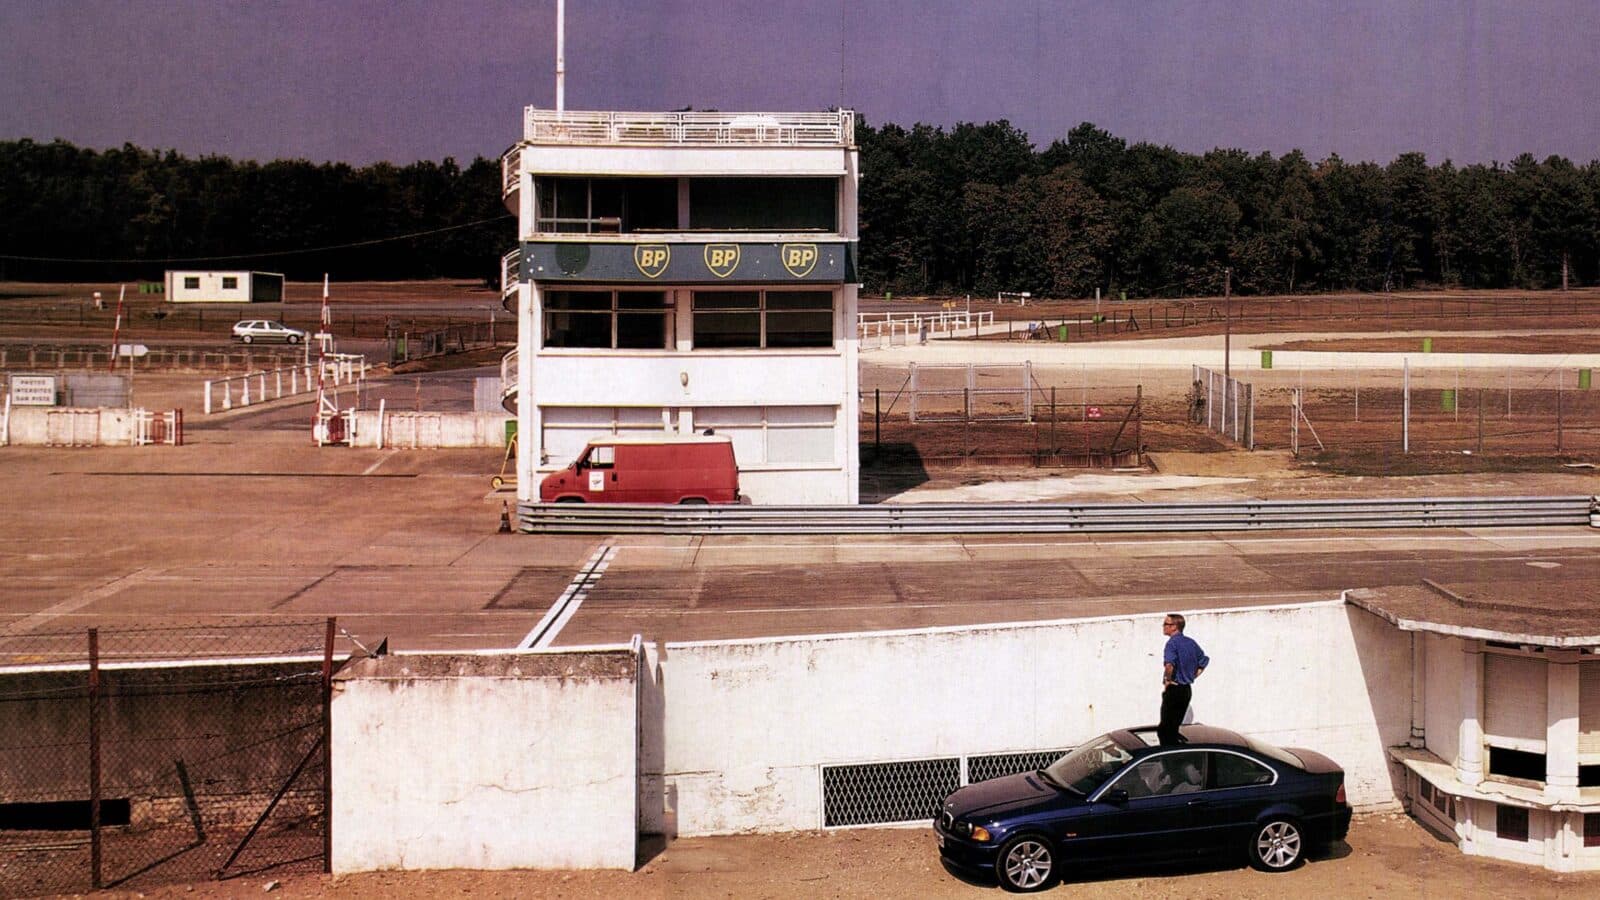 Historic buildings at Montlhery circuit photographed in 2000